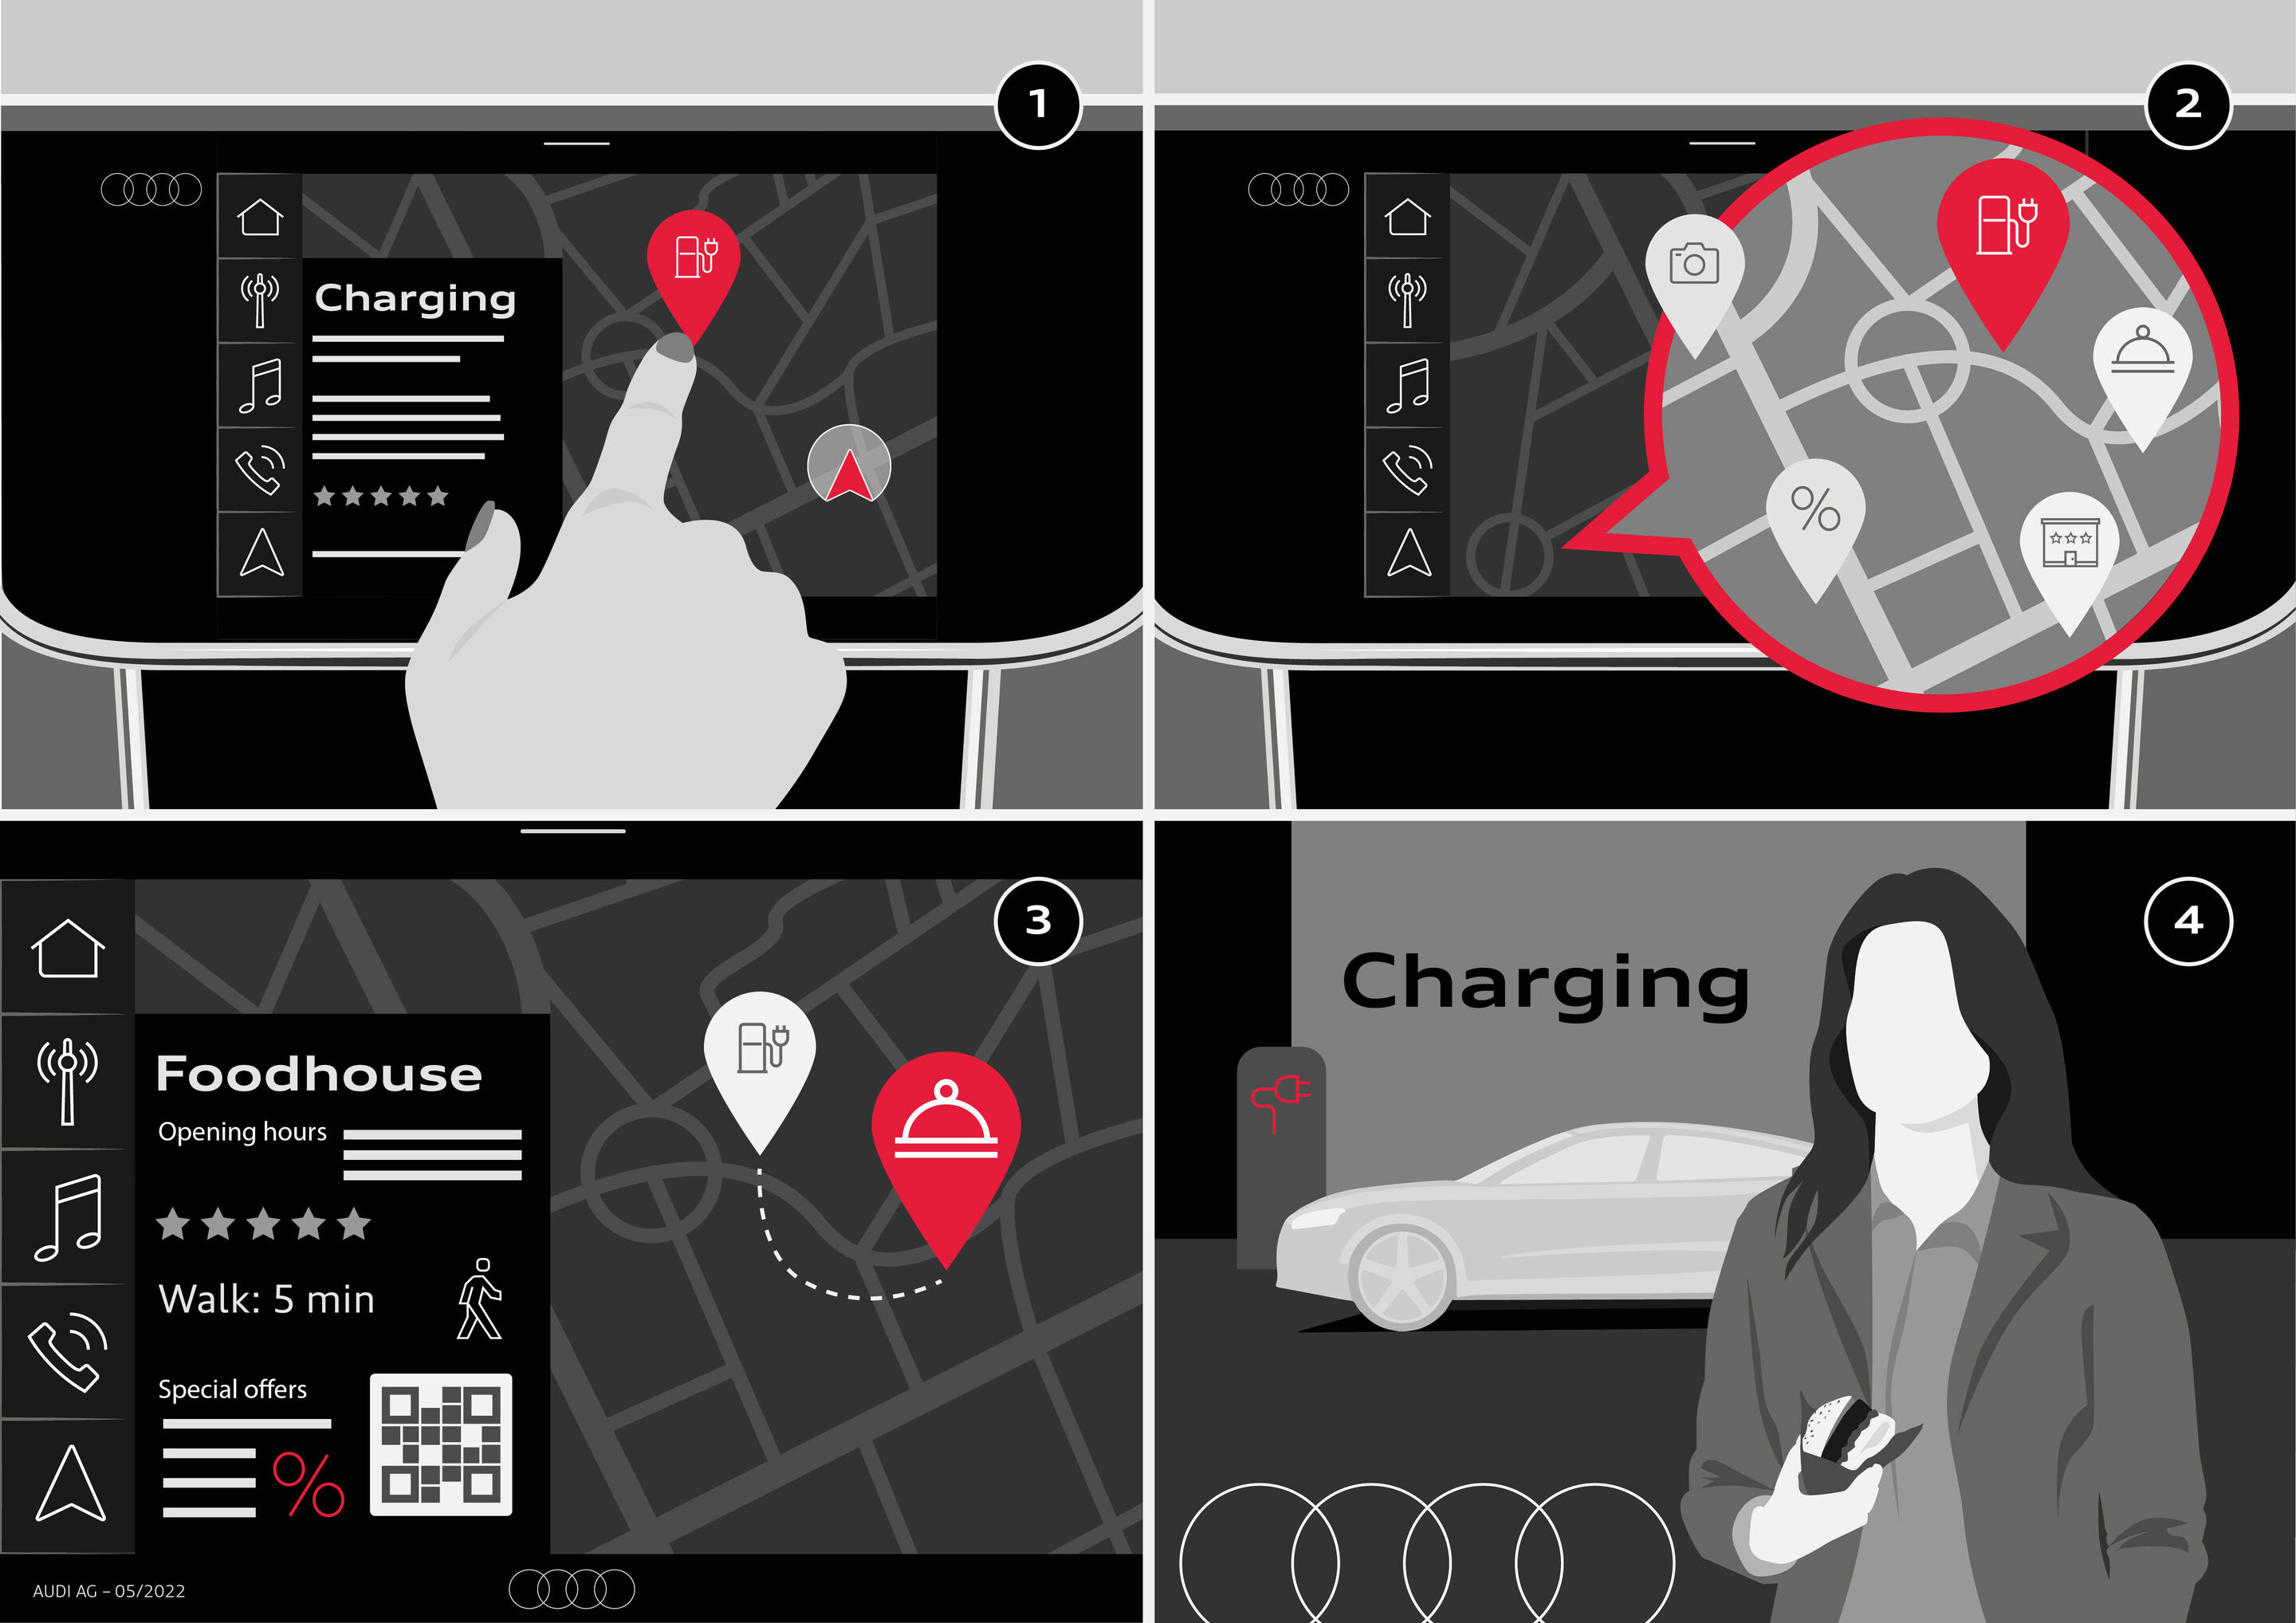 Audi and 4.screen collaborate to deliver a seamless digital in-car customer experience